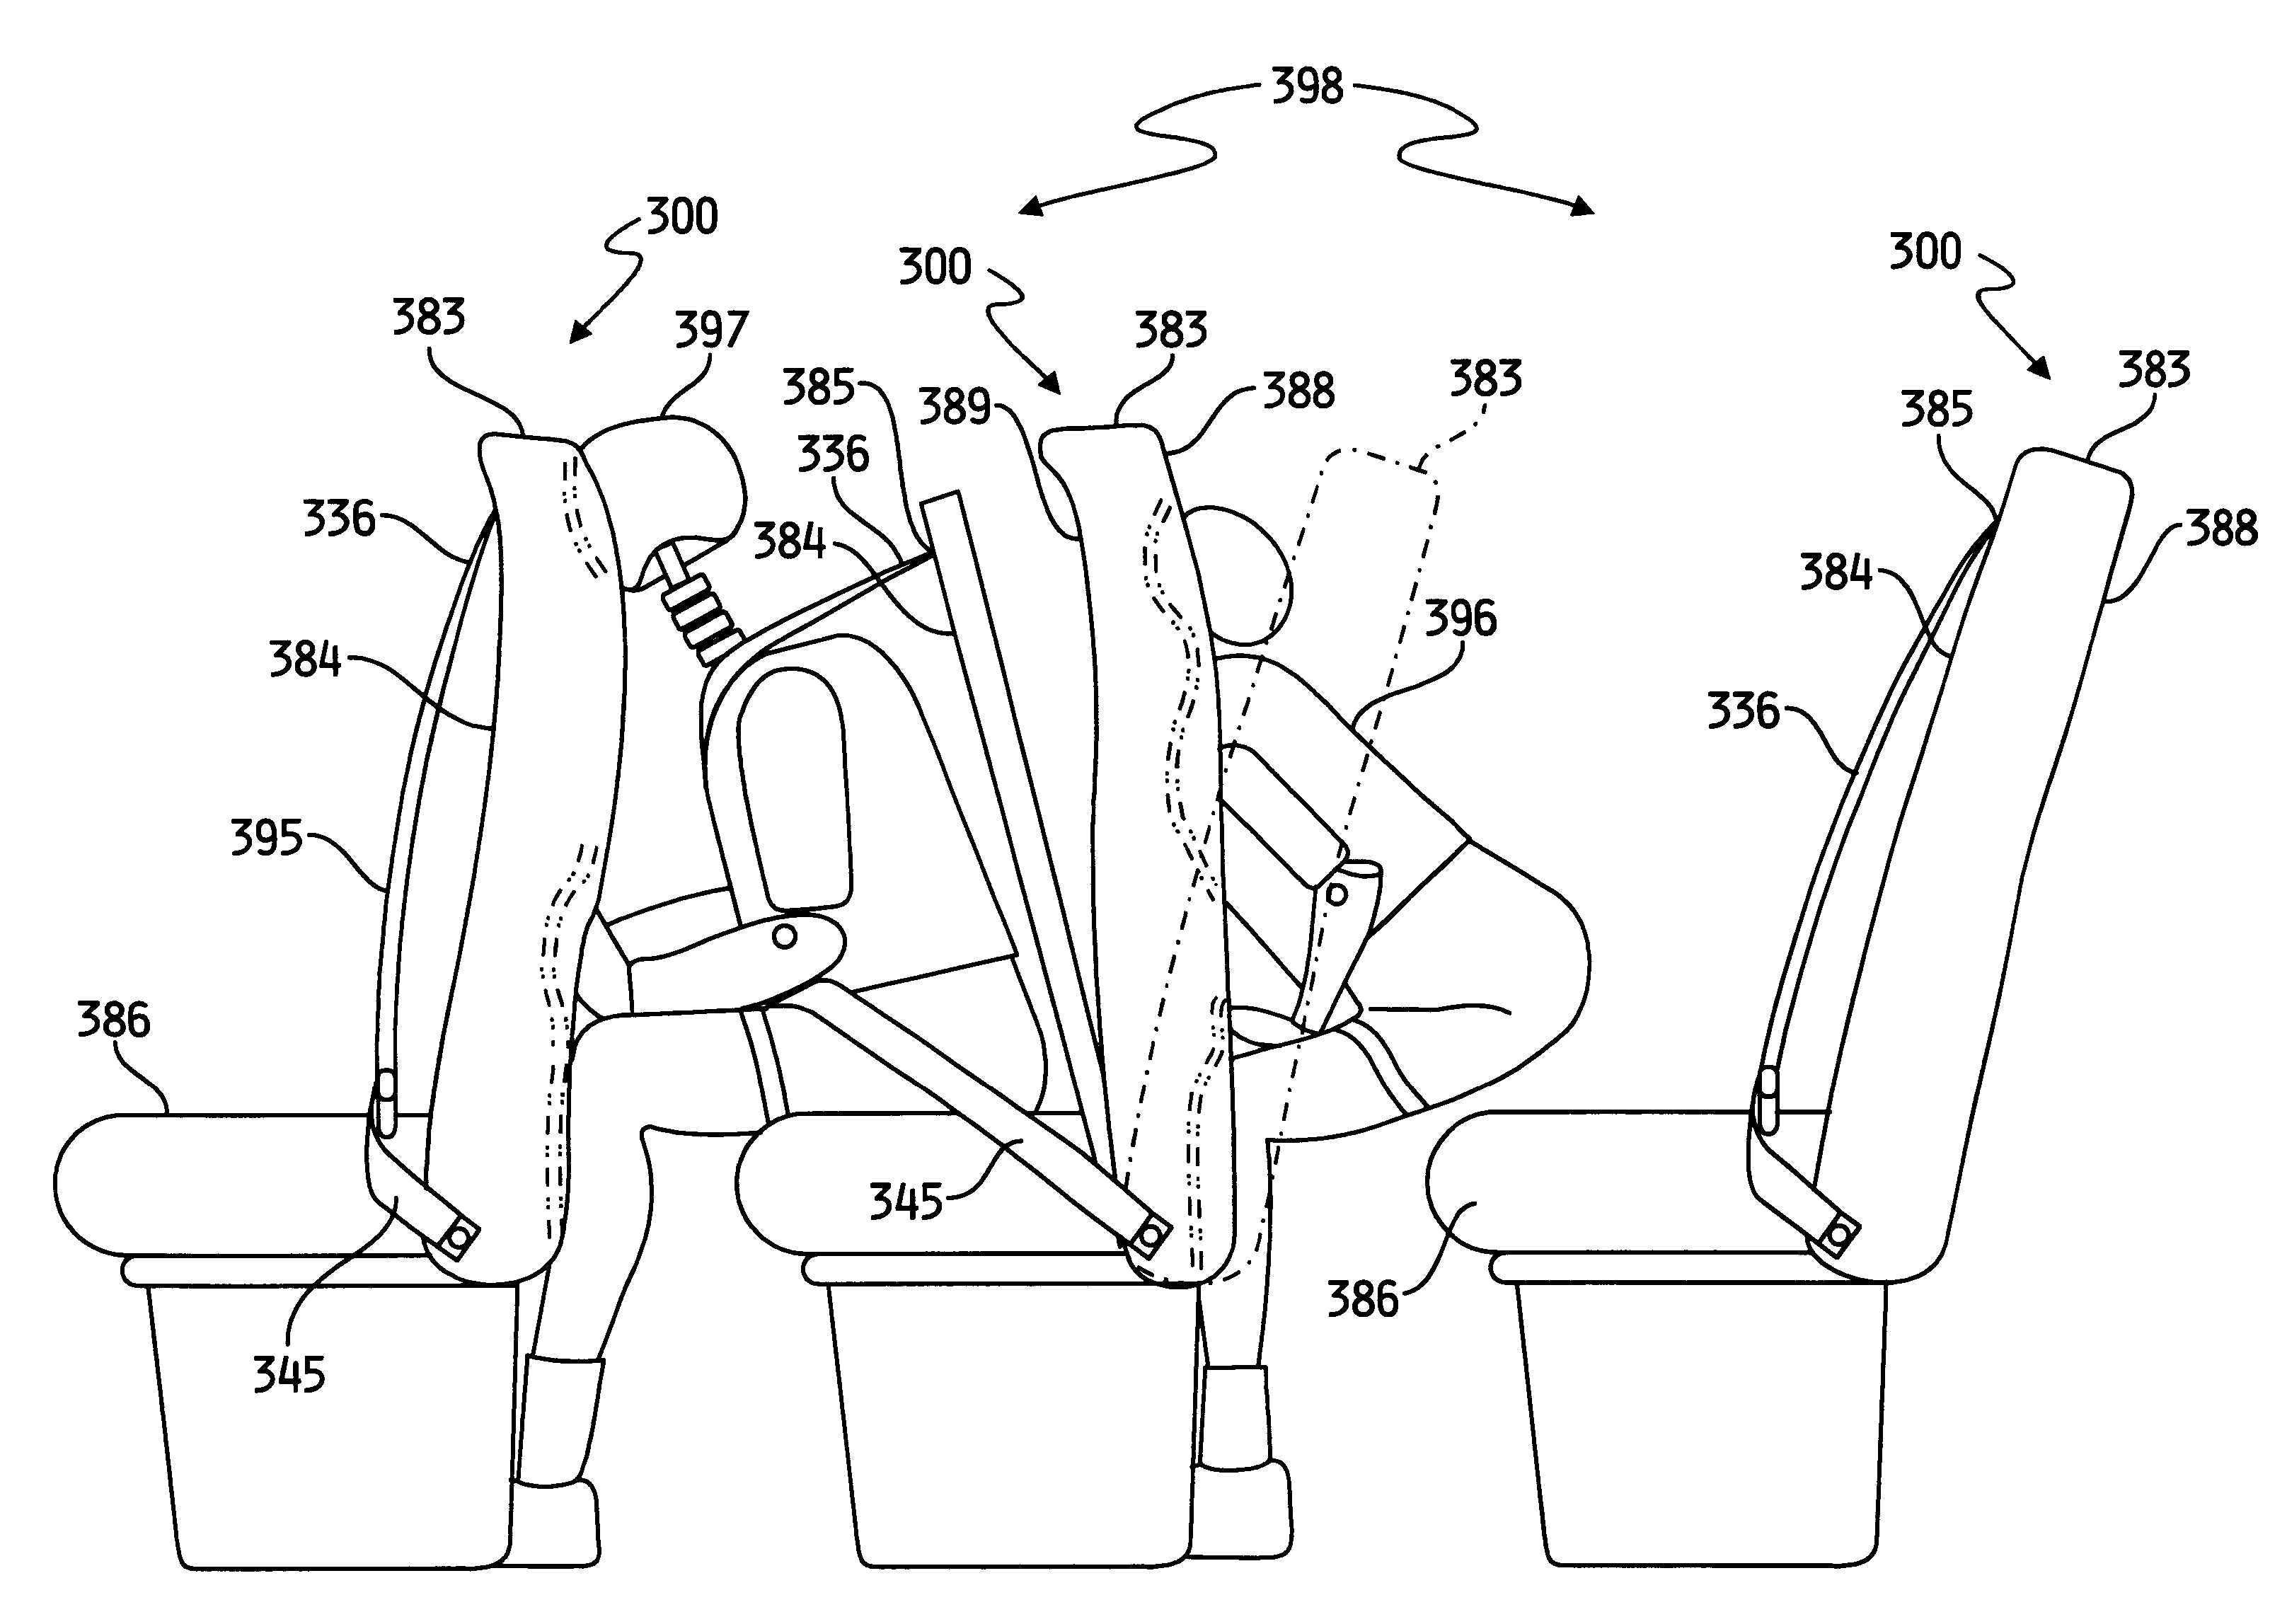 Restraint system for a school bus seat